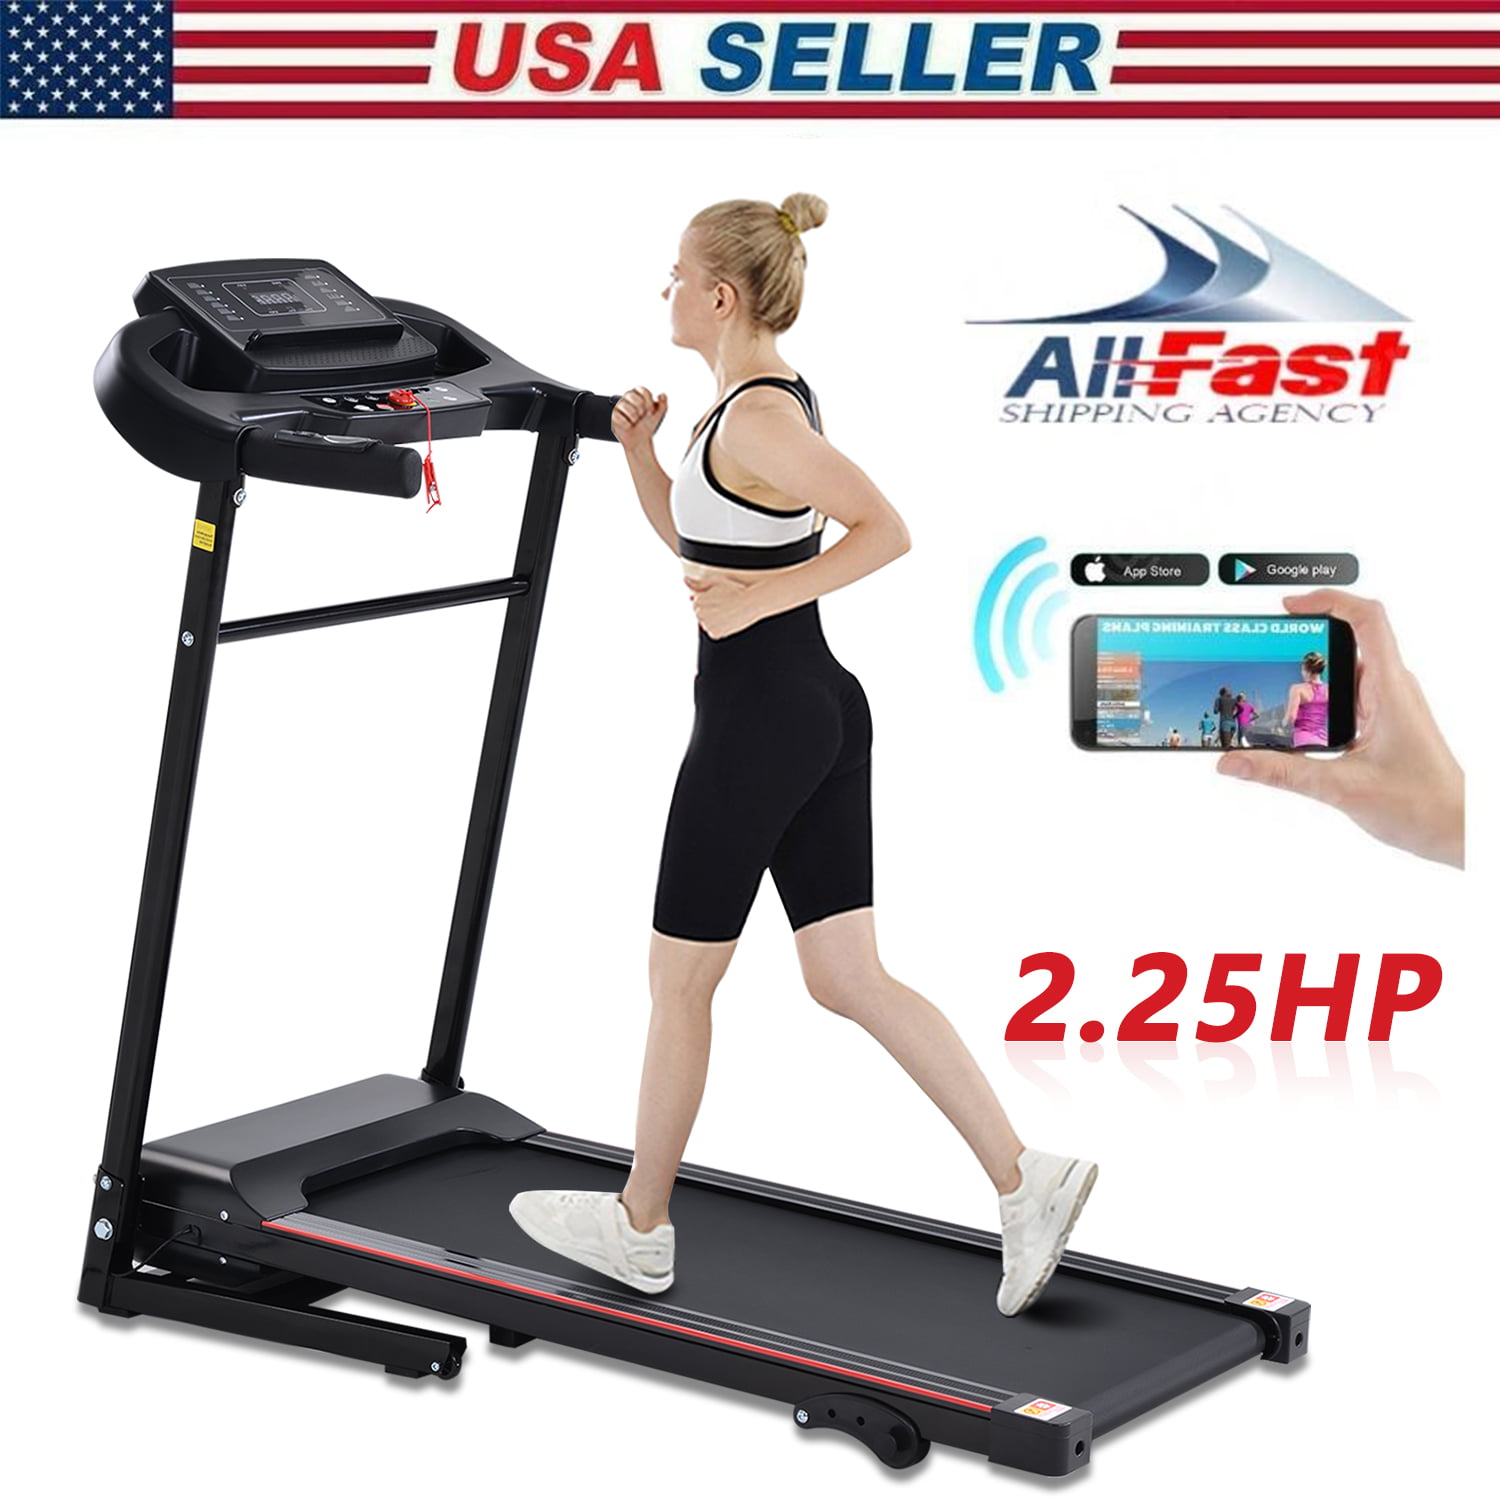 Details about   1800W Electric Treadmill Incline Heavy Duty Fold Home Jogging Running Machine US 